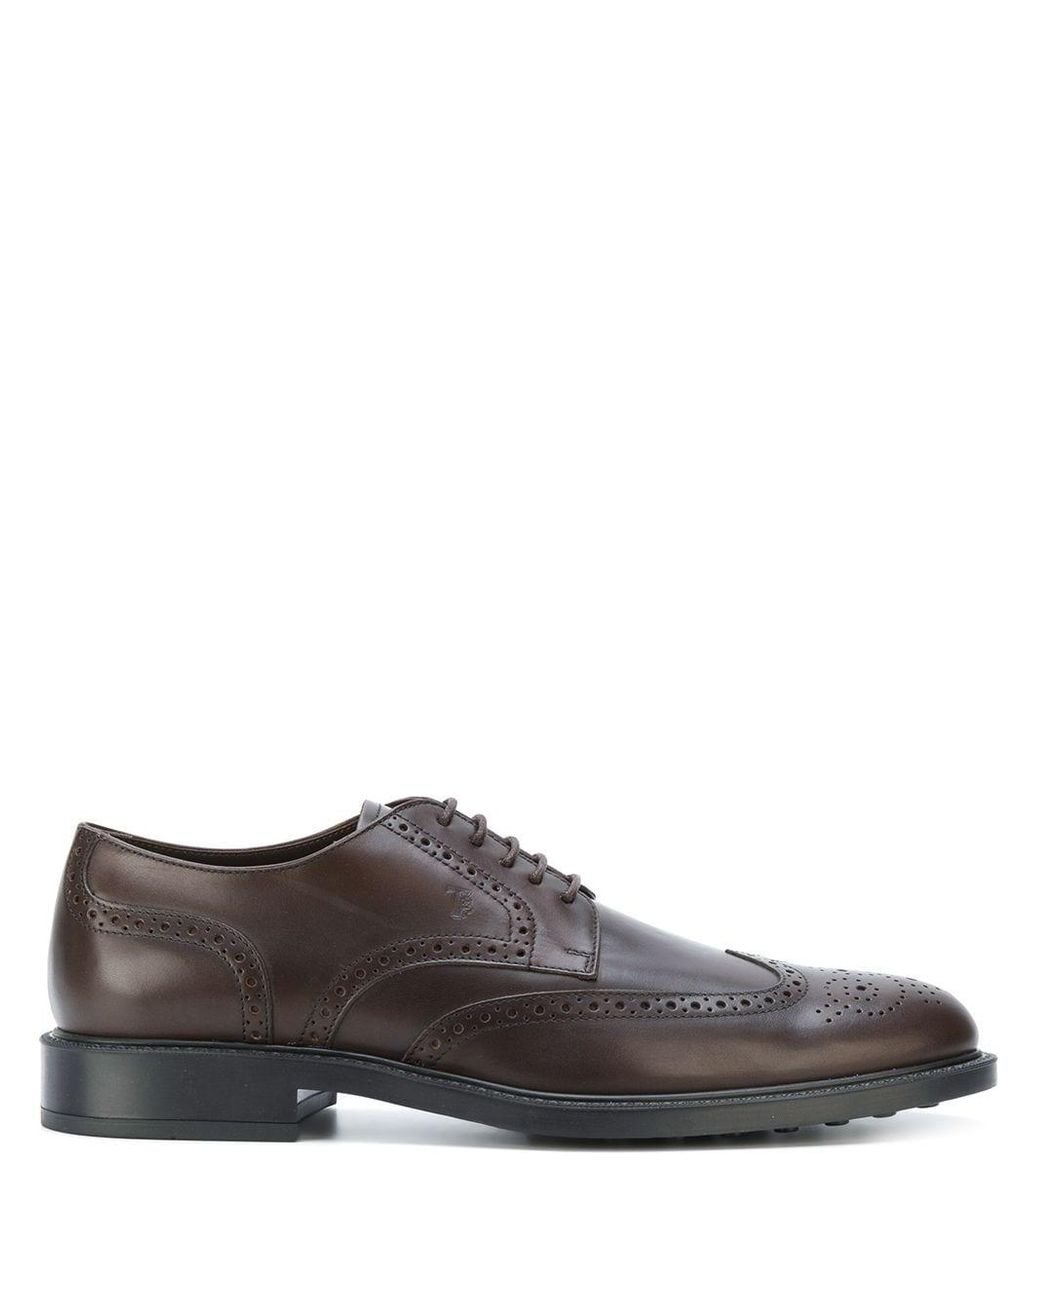 Tod's Leather Brogue Shoes in Brown for Men - Lyst